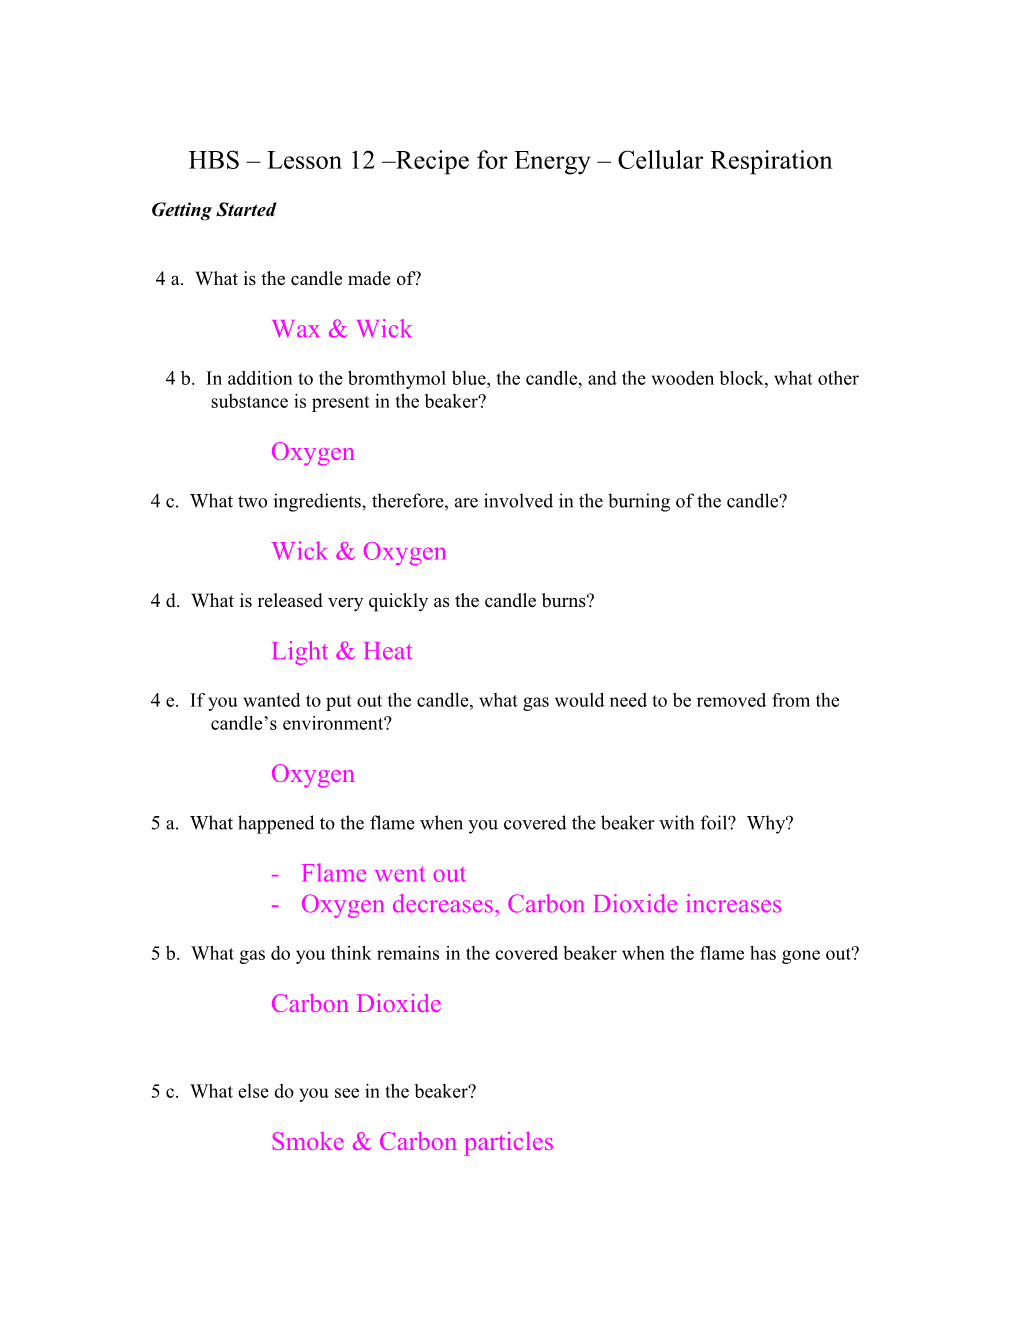 HBS Lesson 12 Recipe for Energy Cellular Respiration